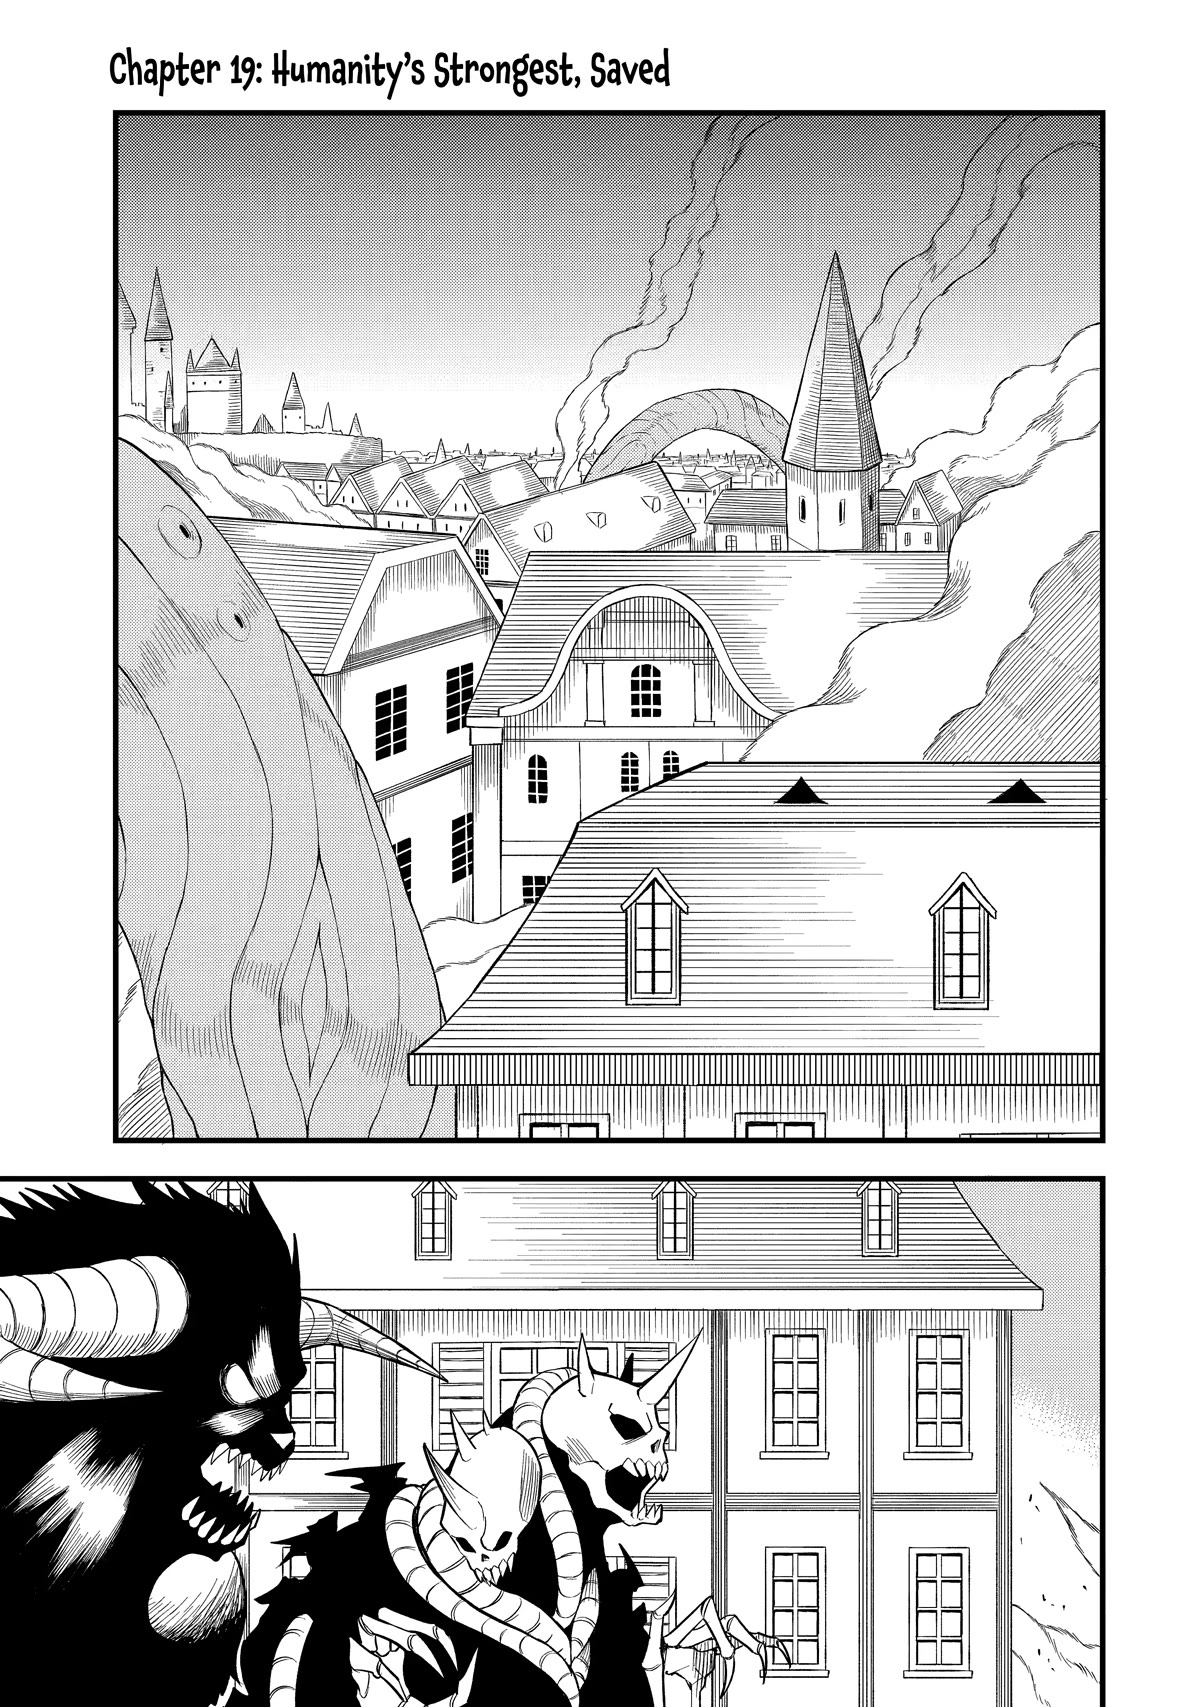 The Legendary Dragon-Armored Knight Wants To Live A Normal Life In The Countryside - Page 1